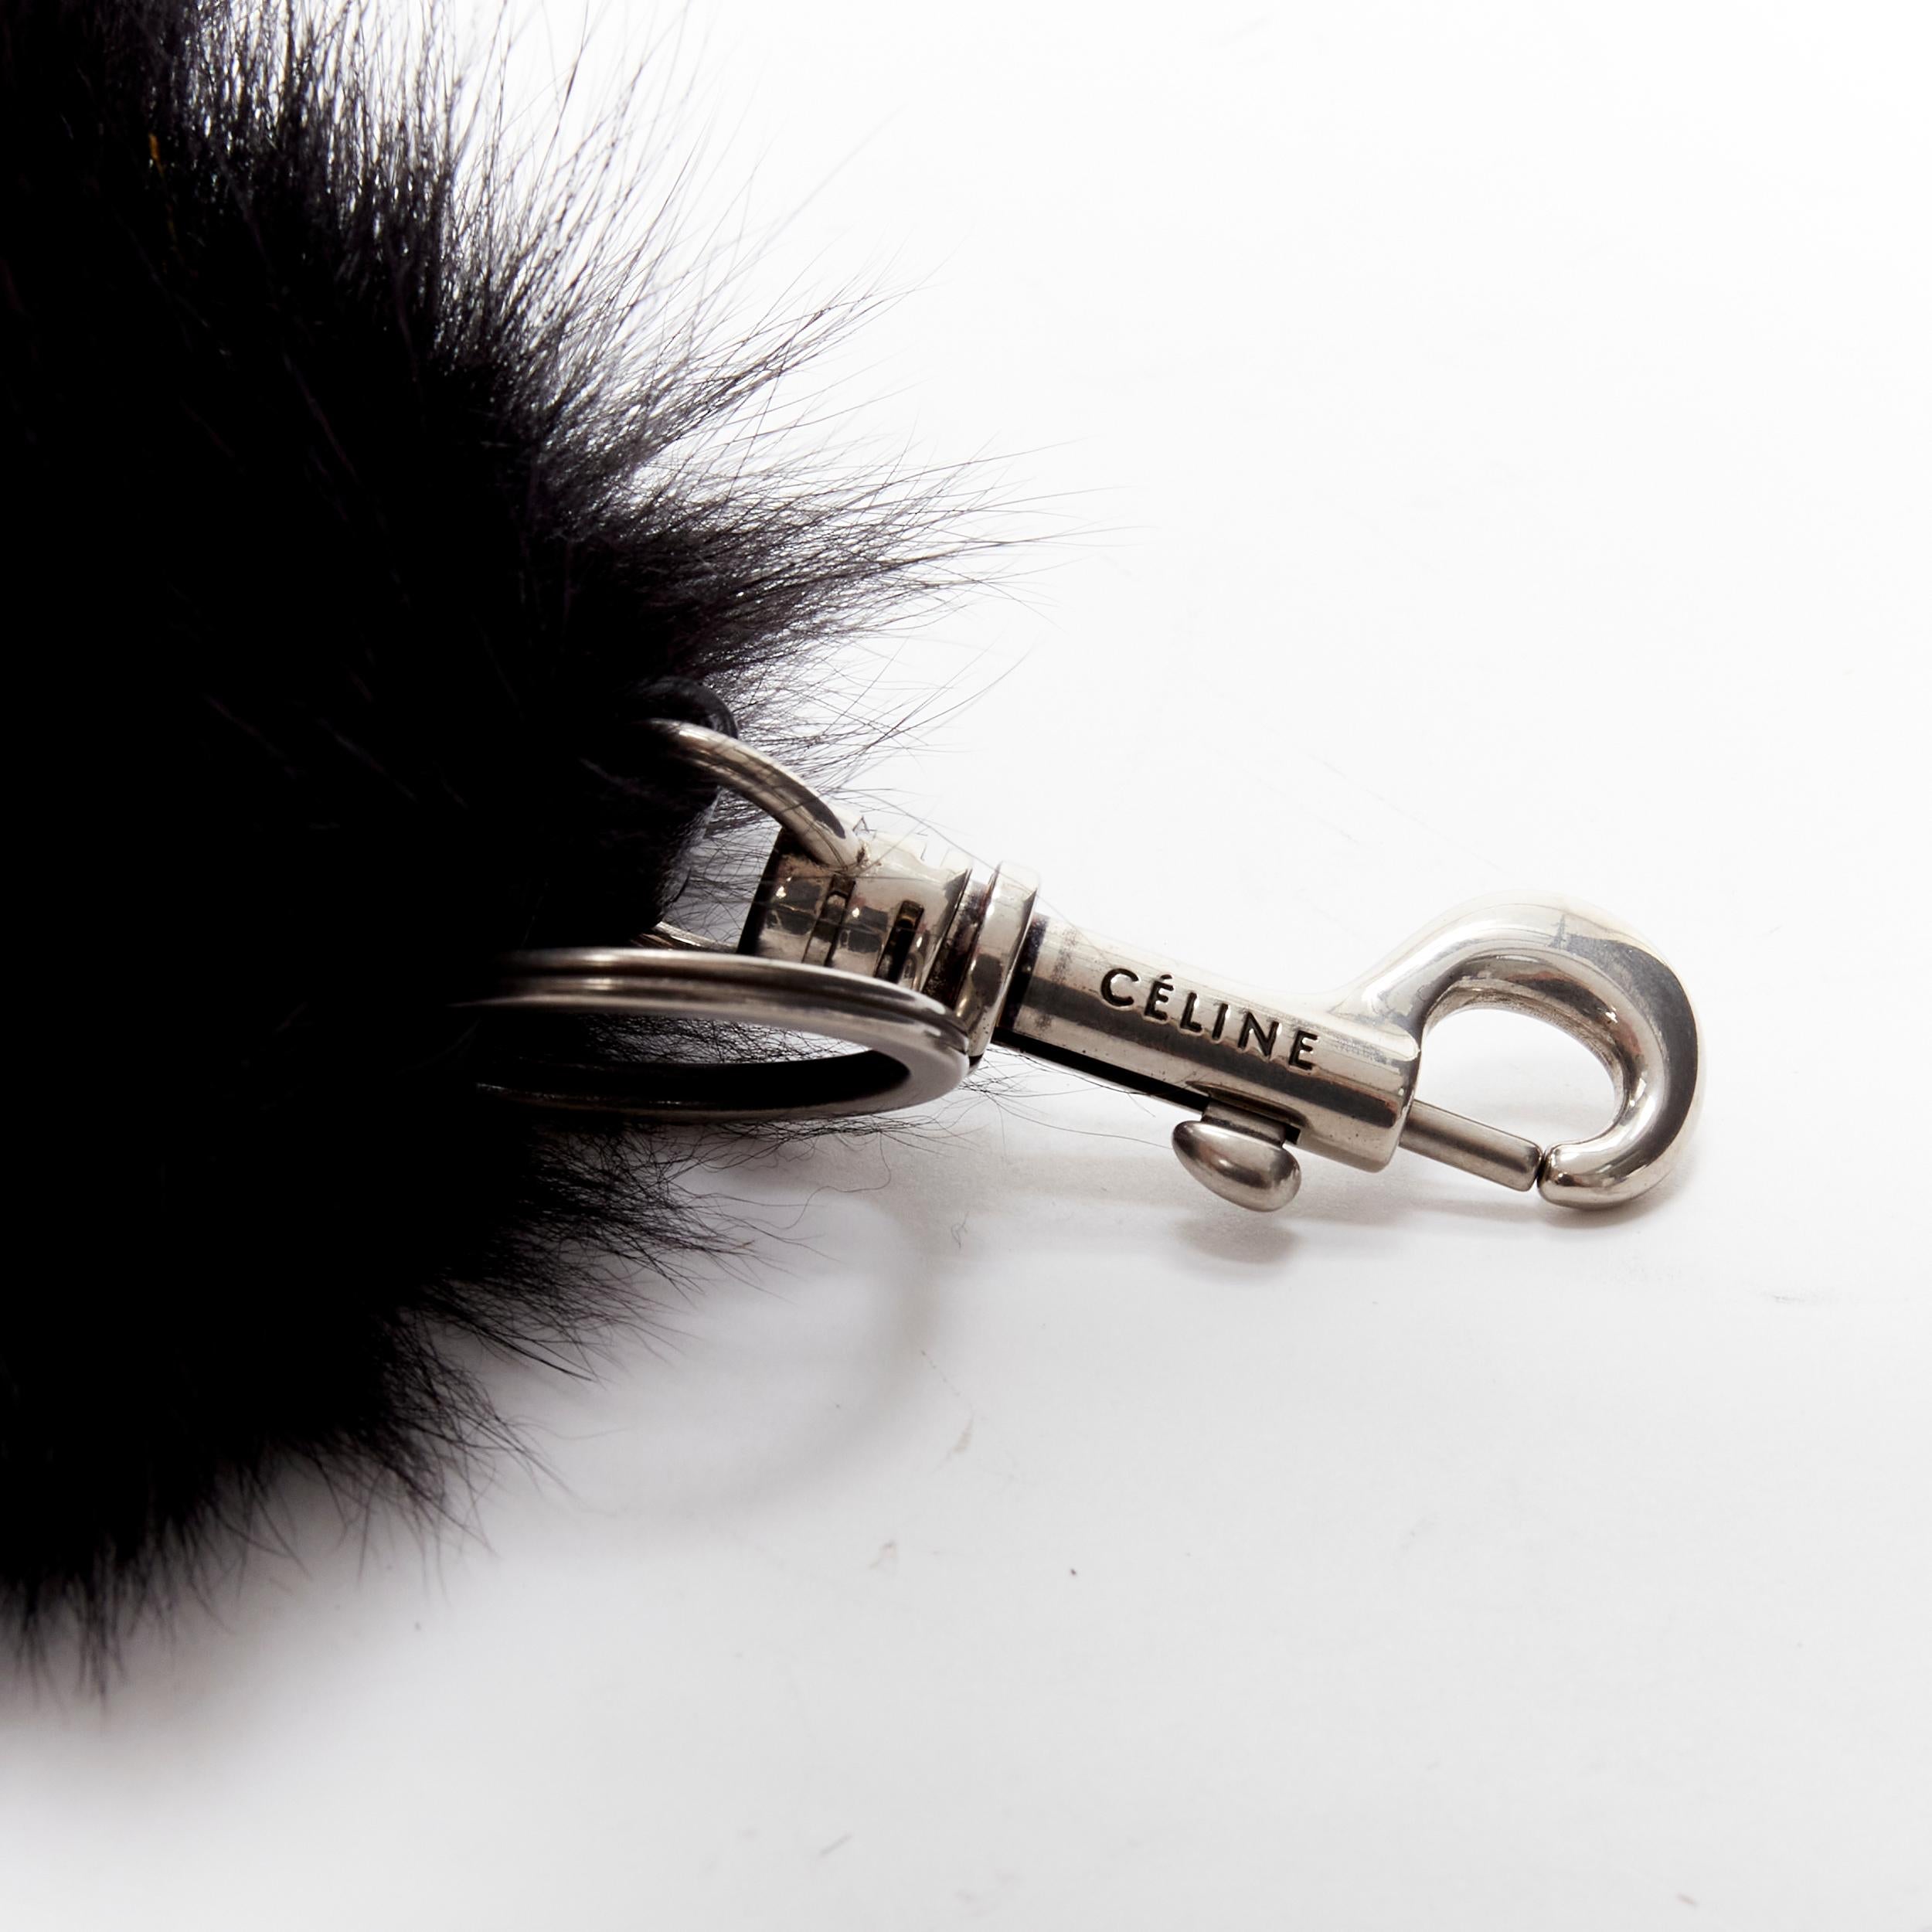 OLD CELINE Phoebe Philo black fox fur tail clasp silver tone keyring bag charm
Reference: LNKO/A02077
Brand: Celine
Designer: Phoebe Philo
Material: Fur, Metal
Color: Black
Pattern: Solid
Closure: Clasp

CONDITION:
Condition: Excellent, this item